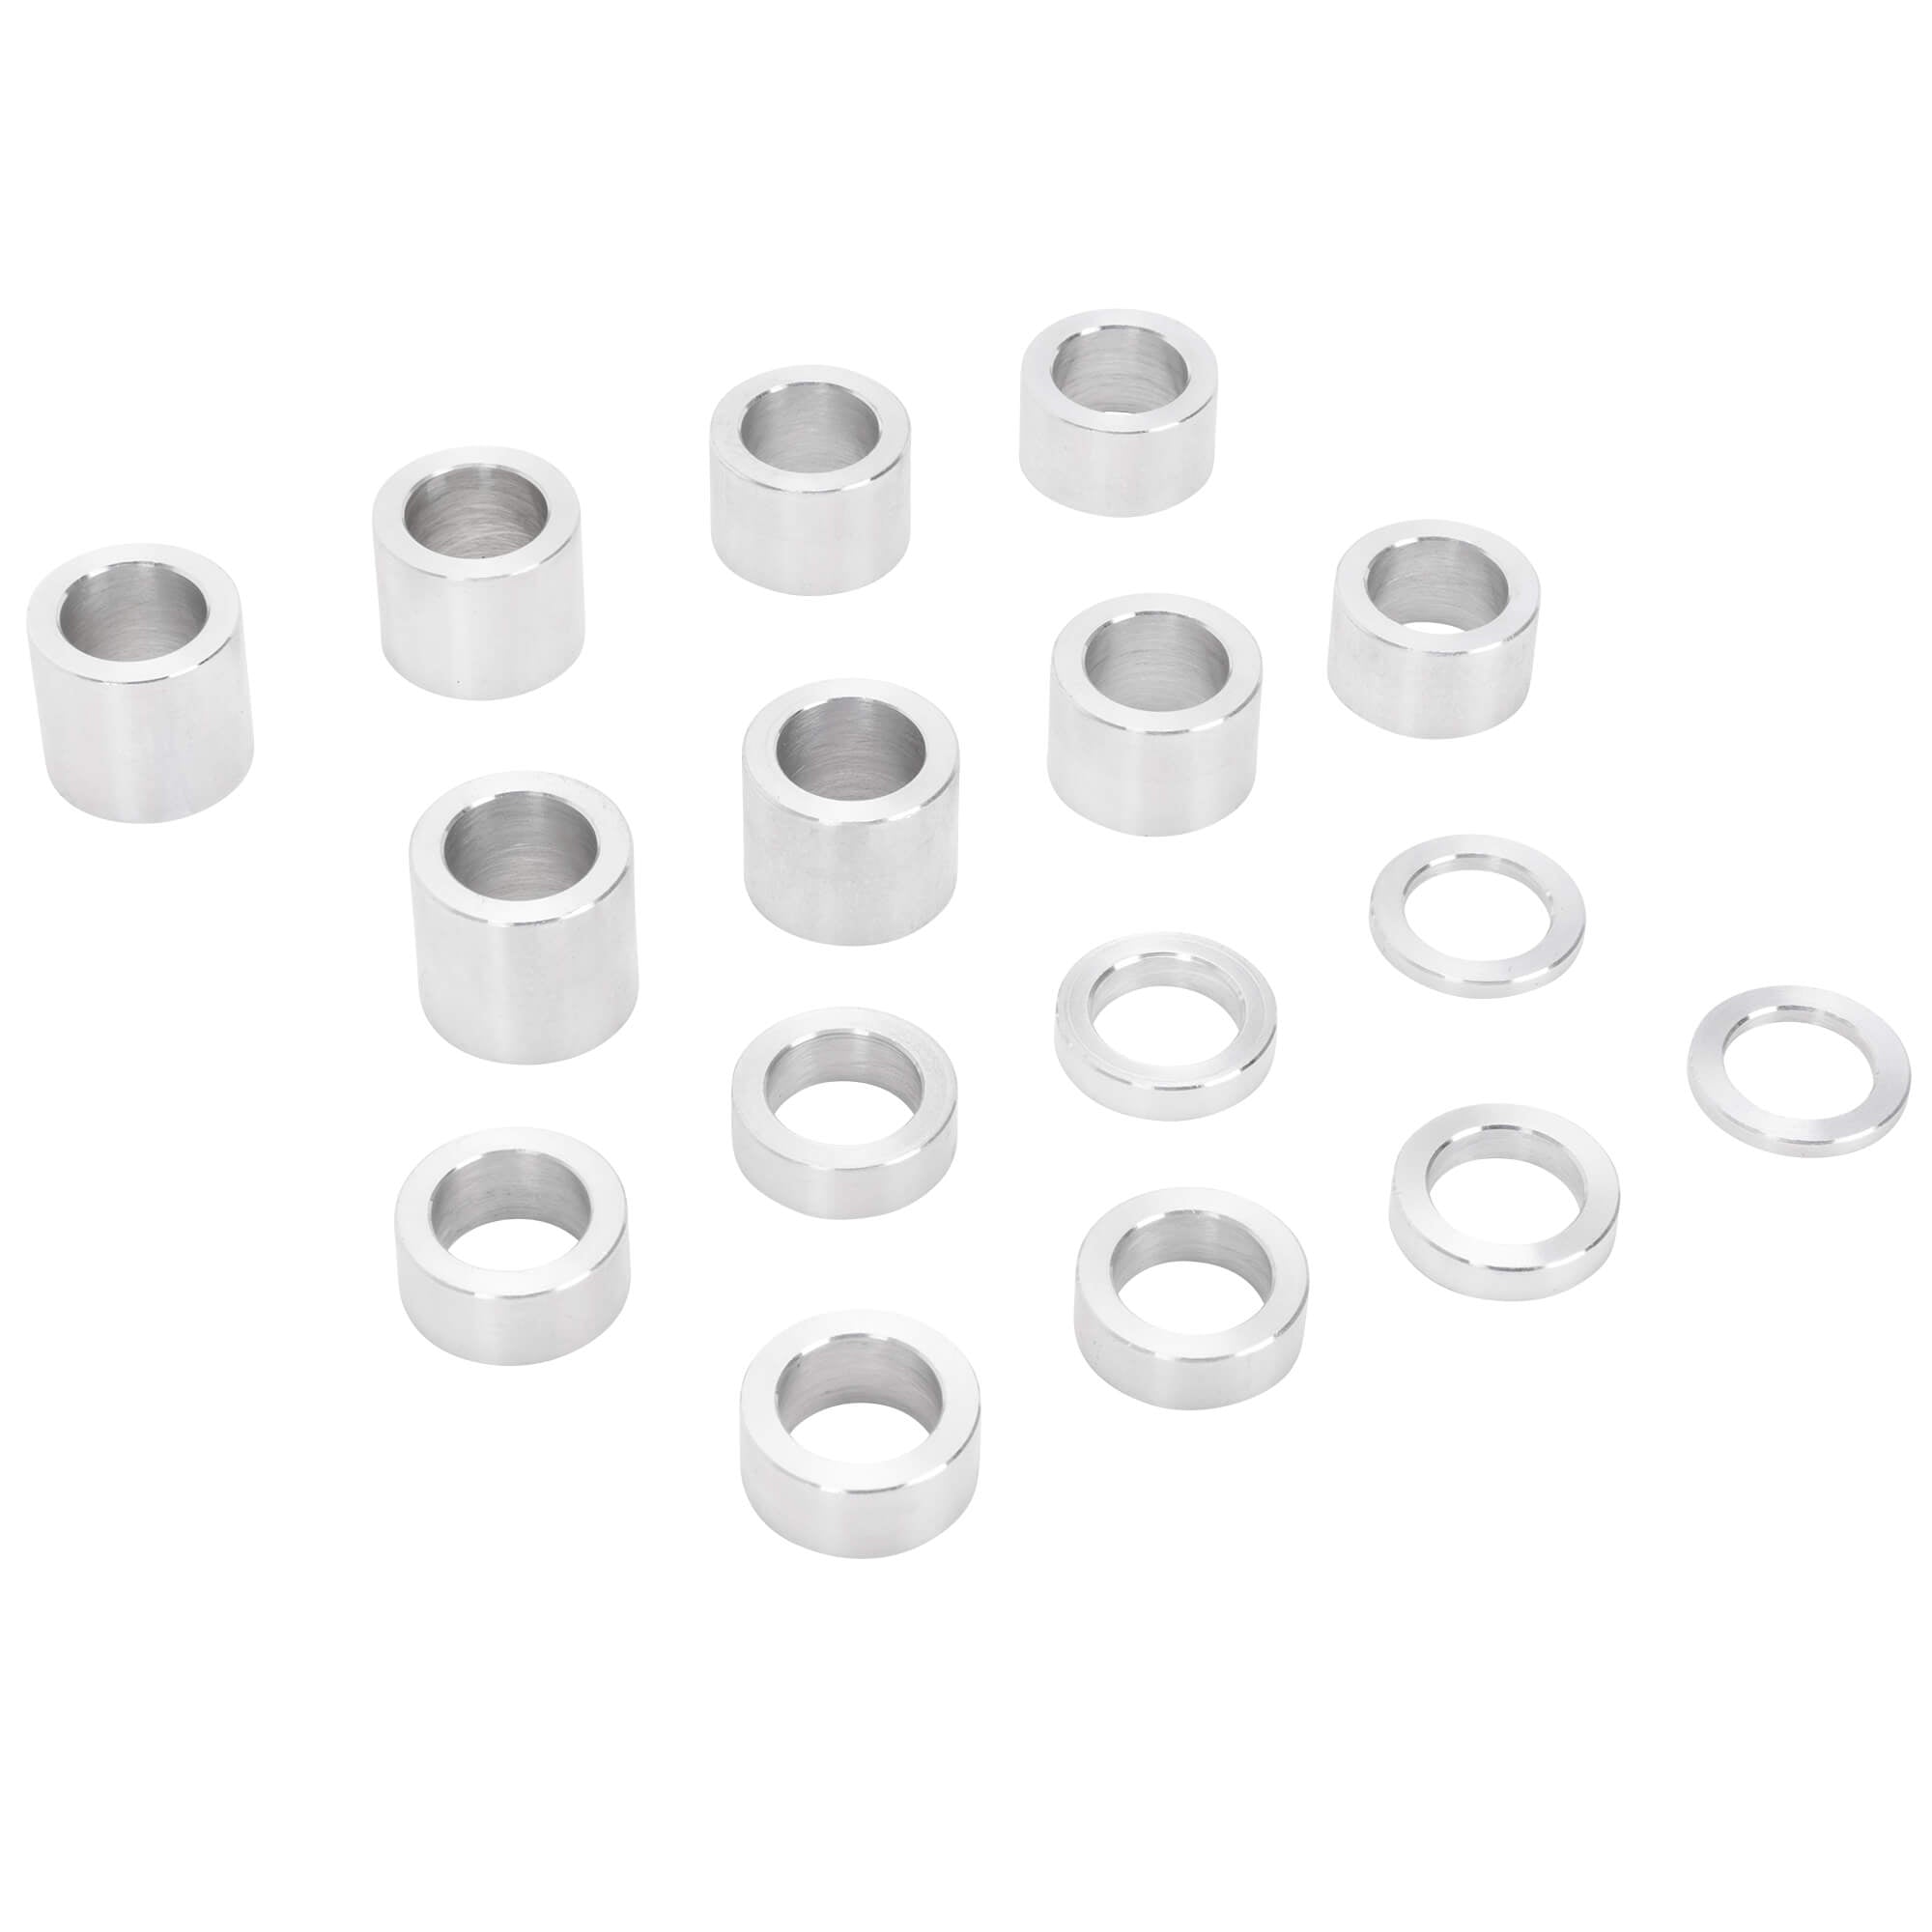 Shop Spacers Category - Military Fasteners